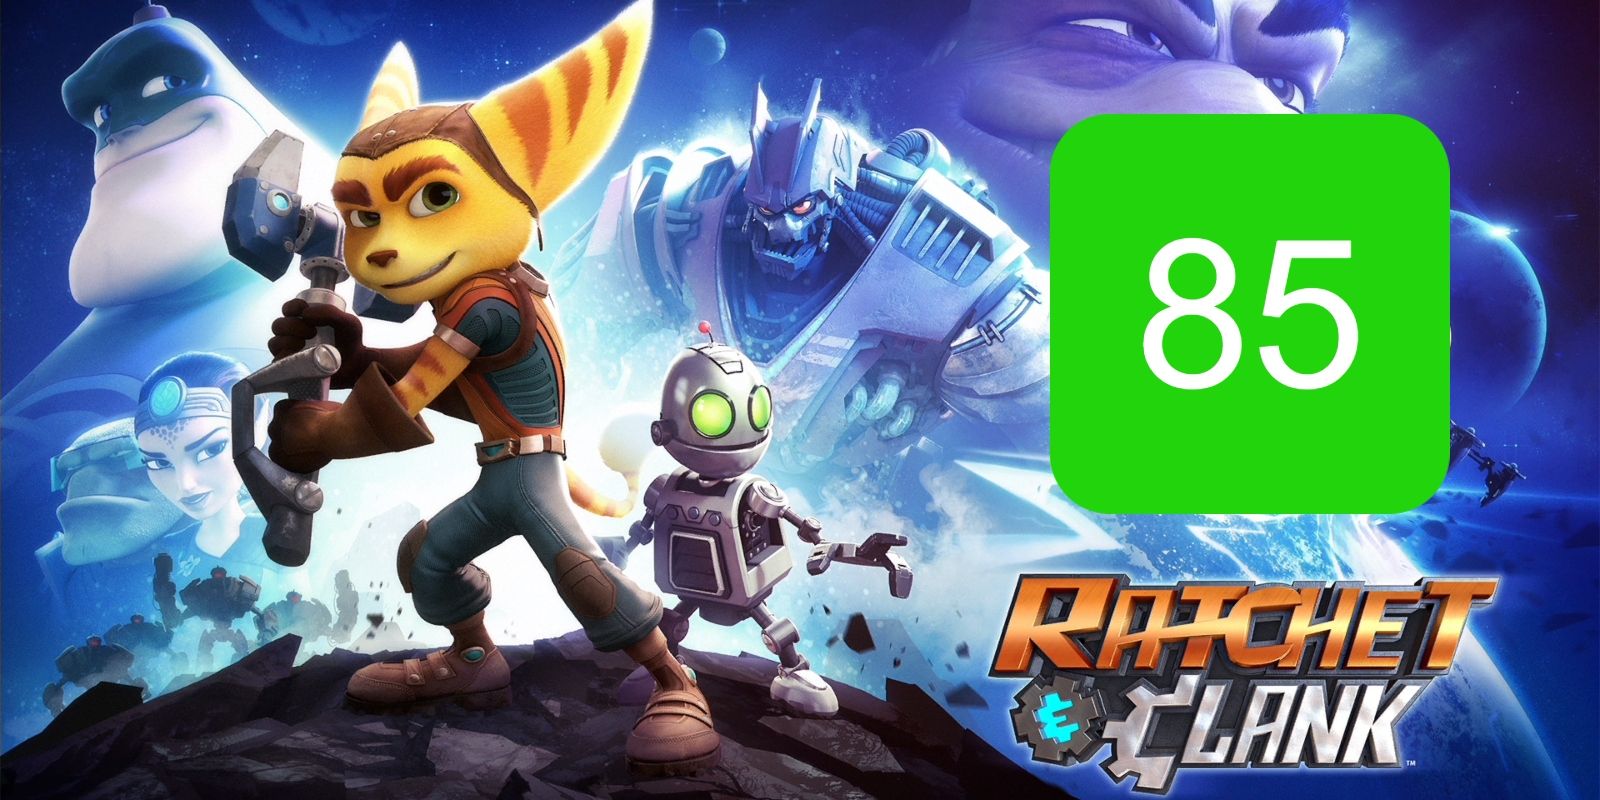 The PS4 metascore for Ratchet and Clank's remake